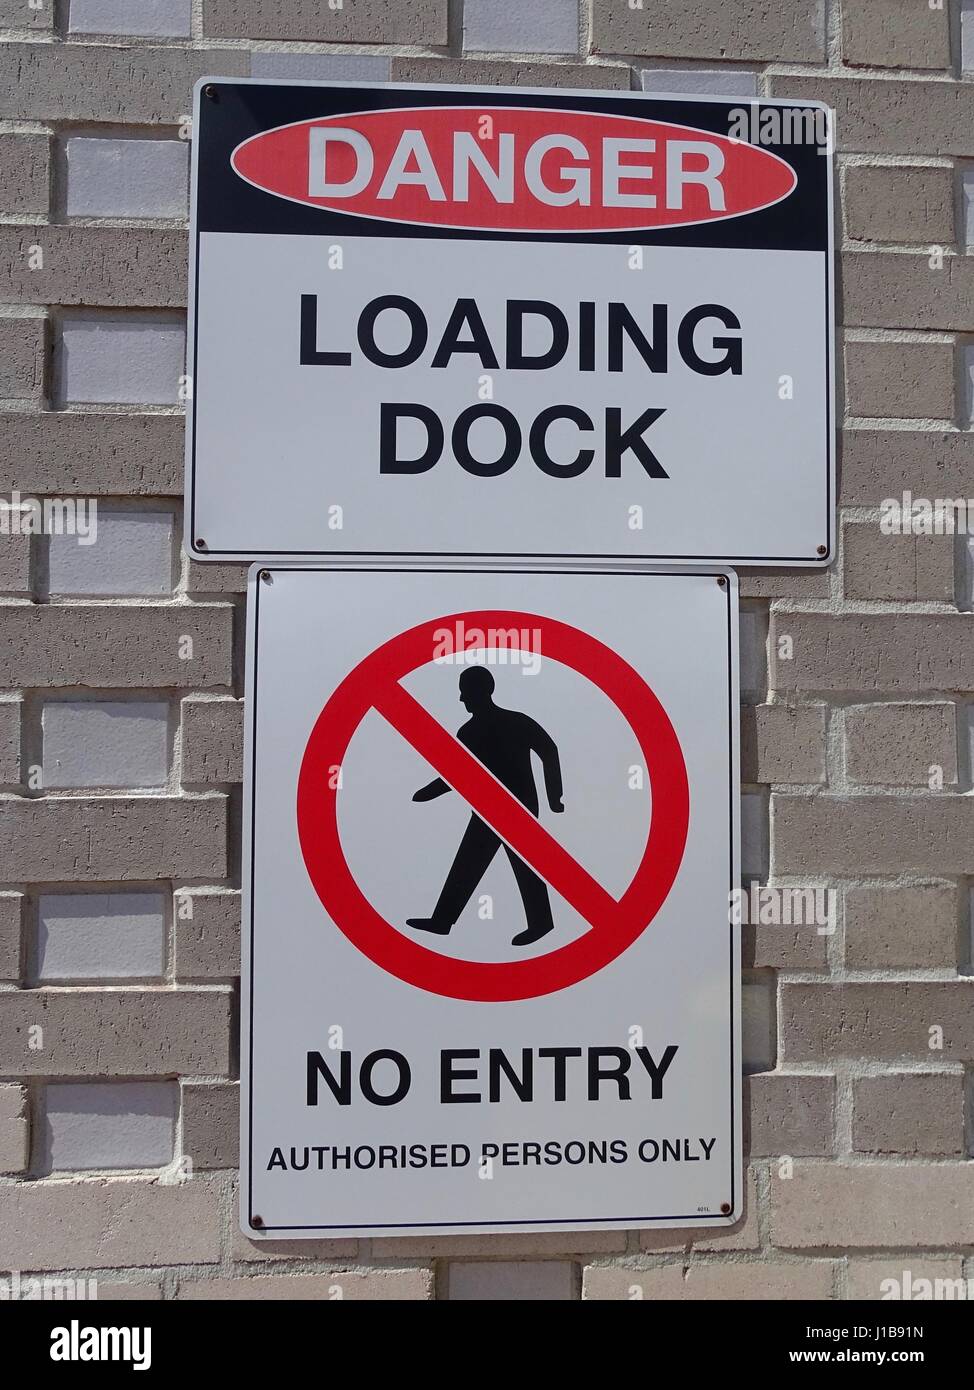 Sign depicting Danger at a Loading Dock Stock Photo